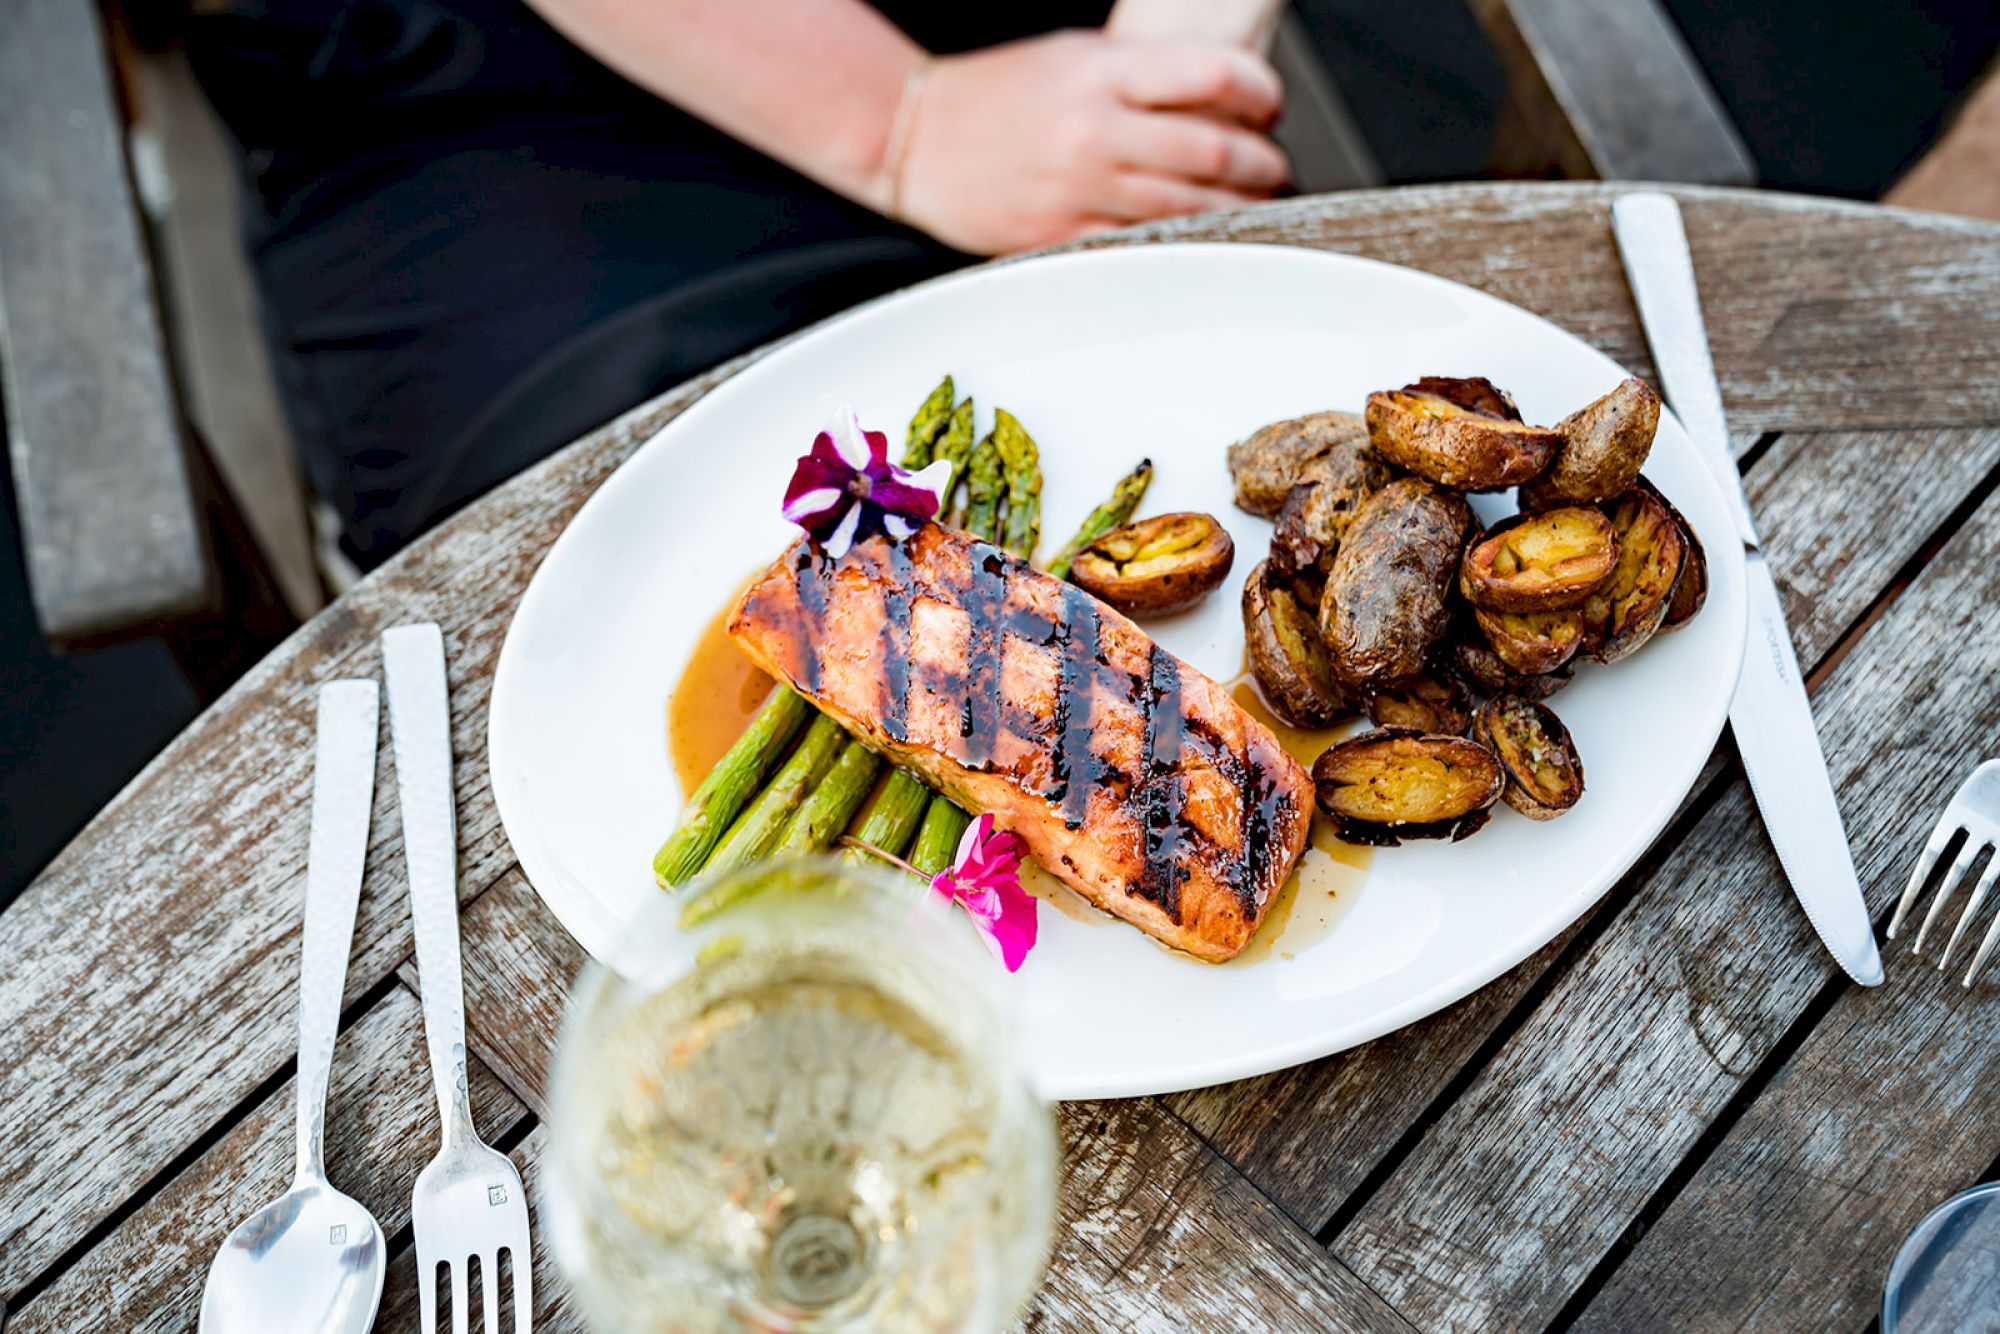 A plate of grilled salmon with asparagus and roasted potatoes on a wooden table, accompanied by a glass of white wine.